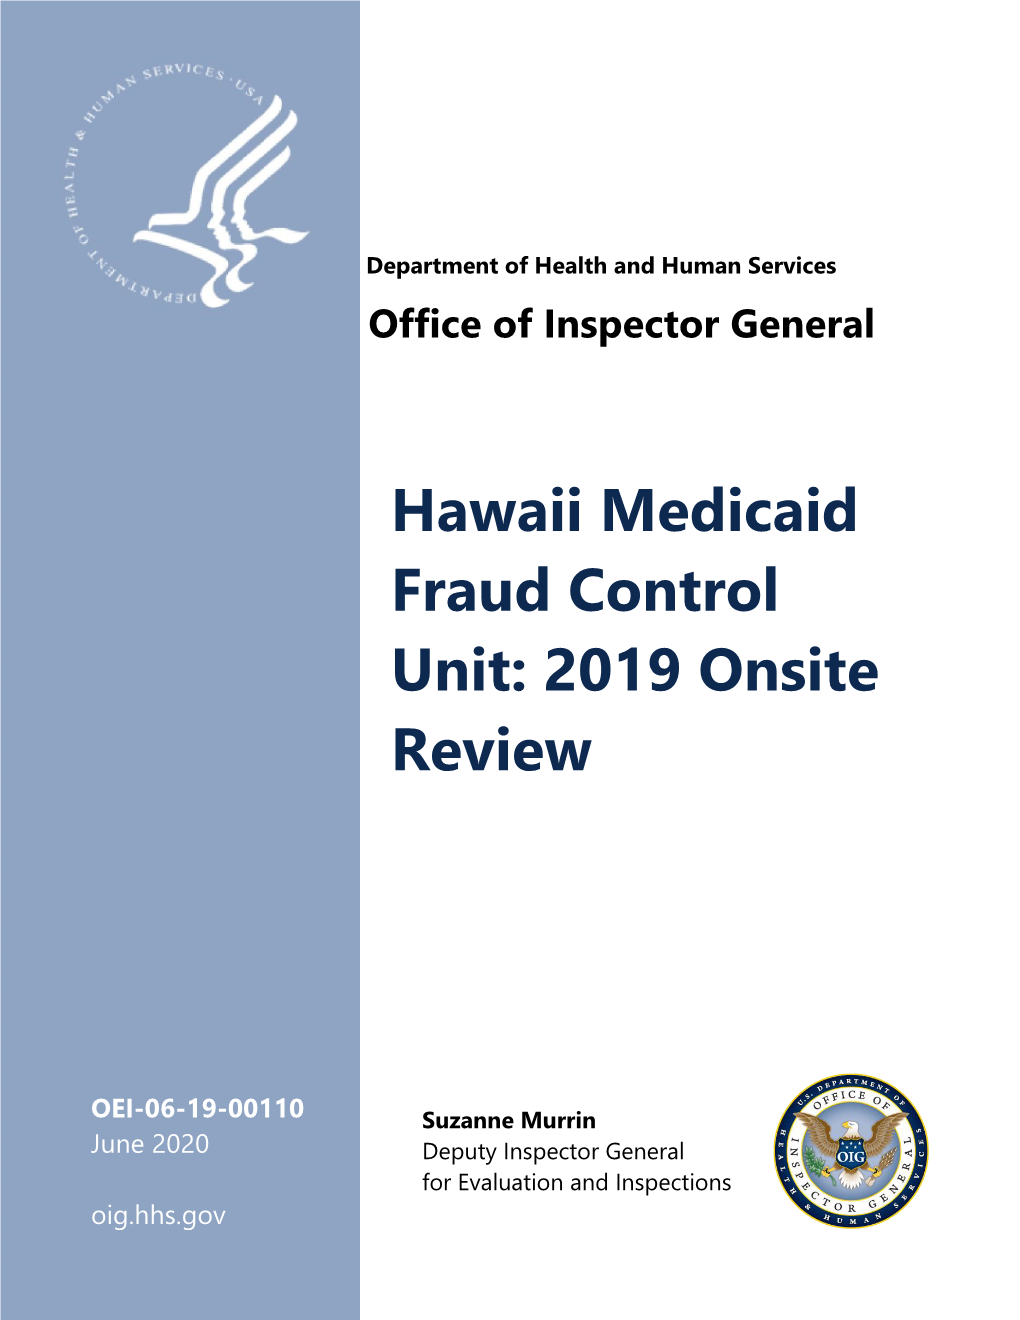 Hawaii Medicaid Fraud Control Unit: 2019 Onsite Review